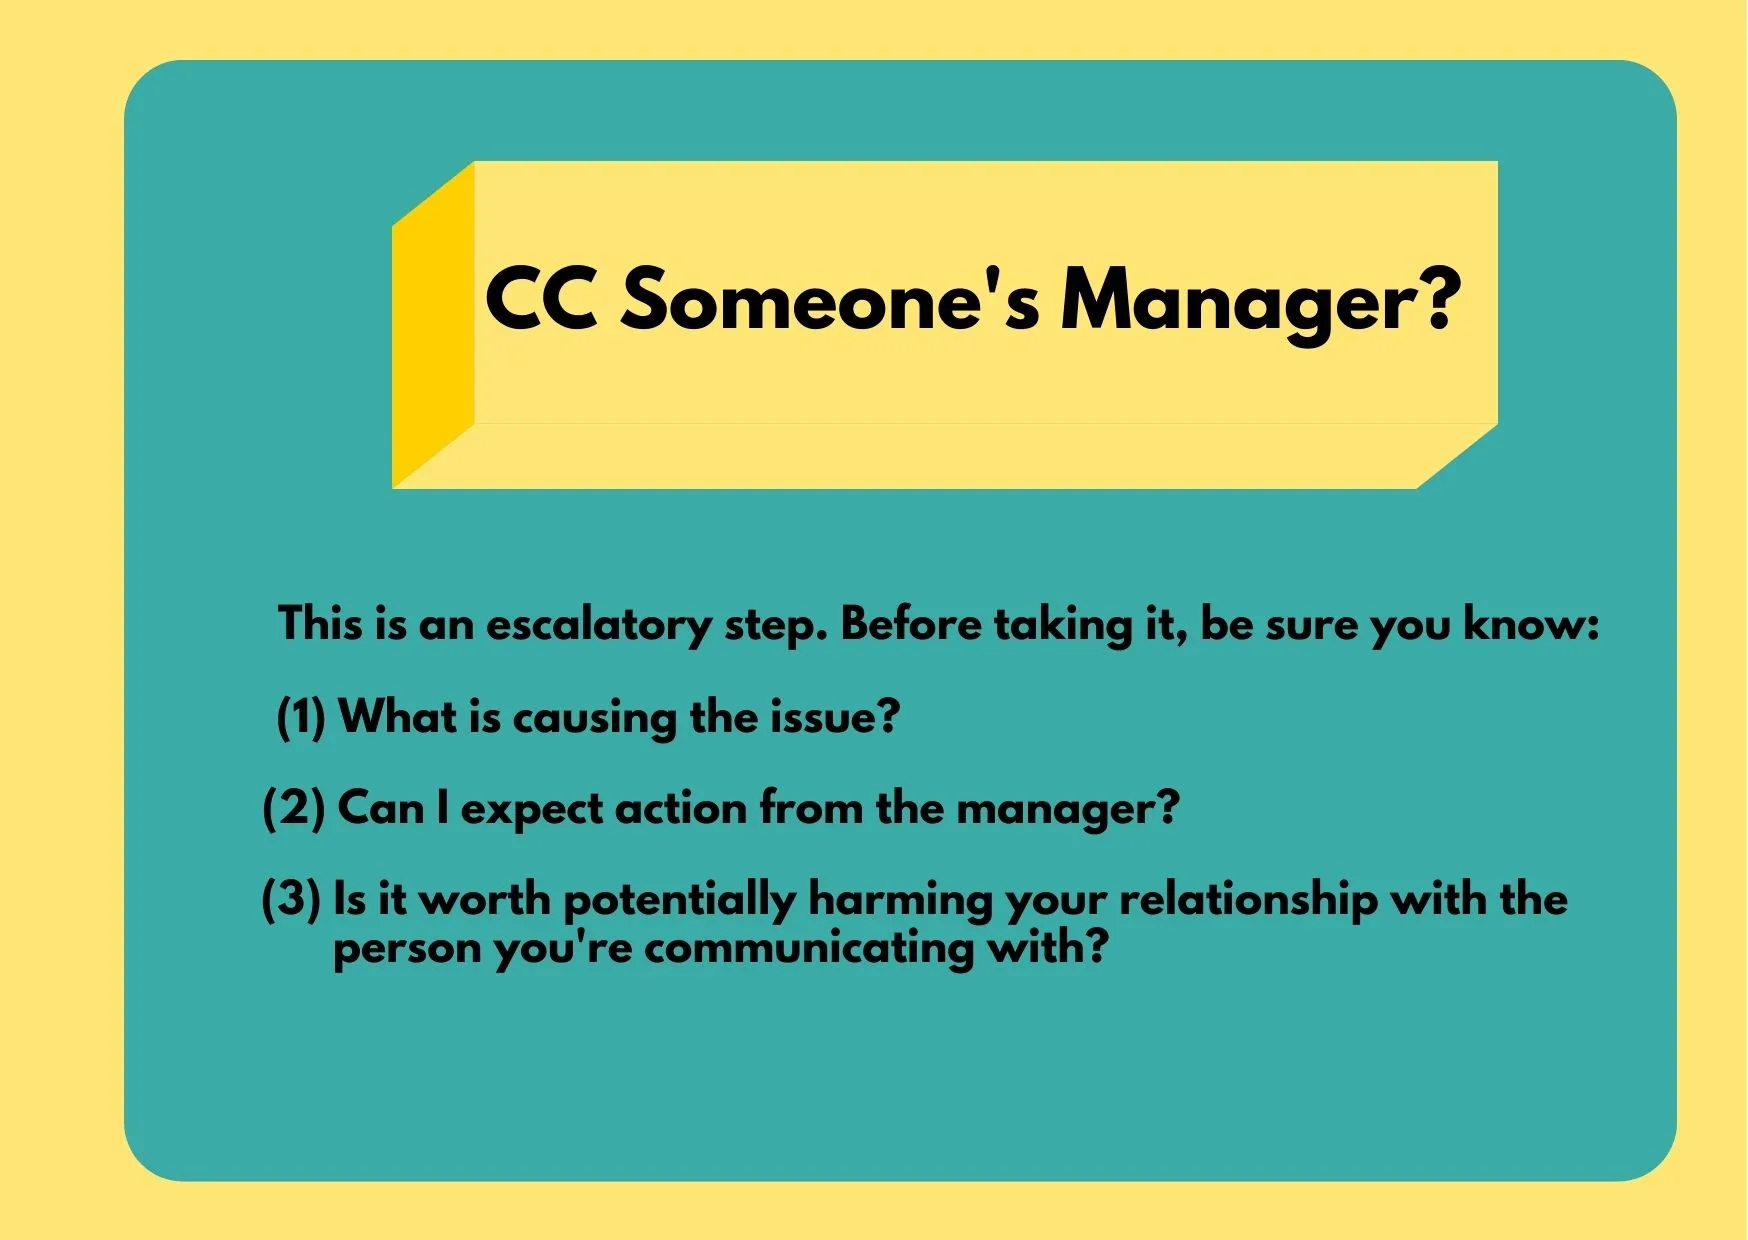 Graphic asking if you should CC Someone's manager? Answer is that you have to make sure you've done all you could, have all the information, and that's worth it to potentially harm the relationship of the person you're communicating with.